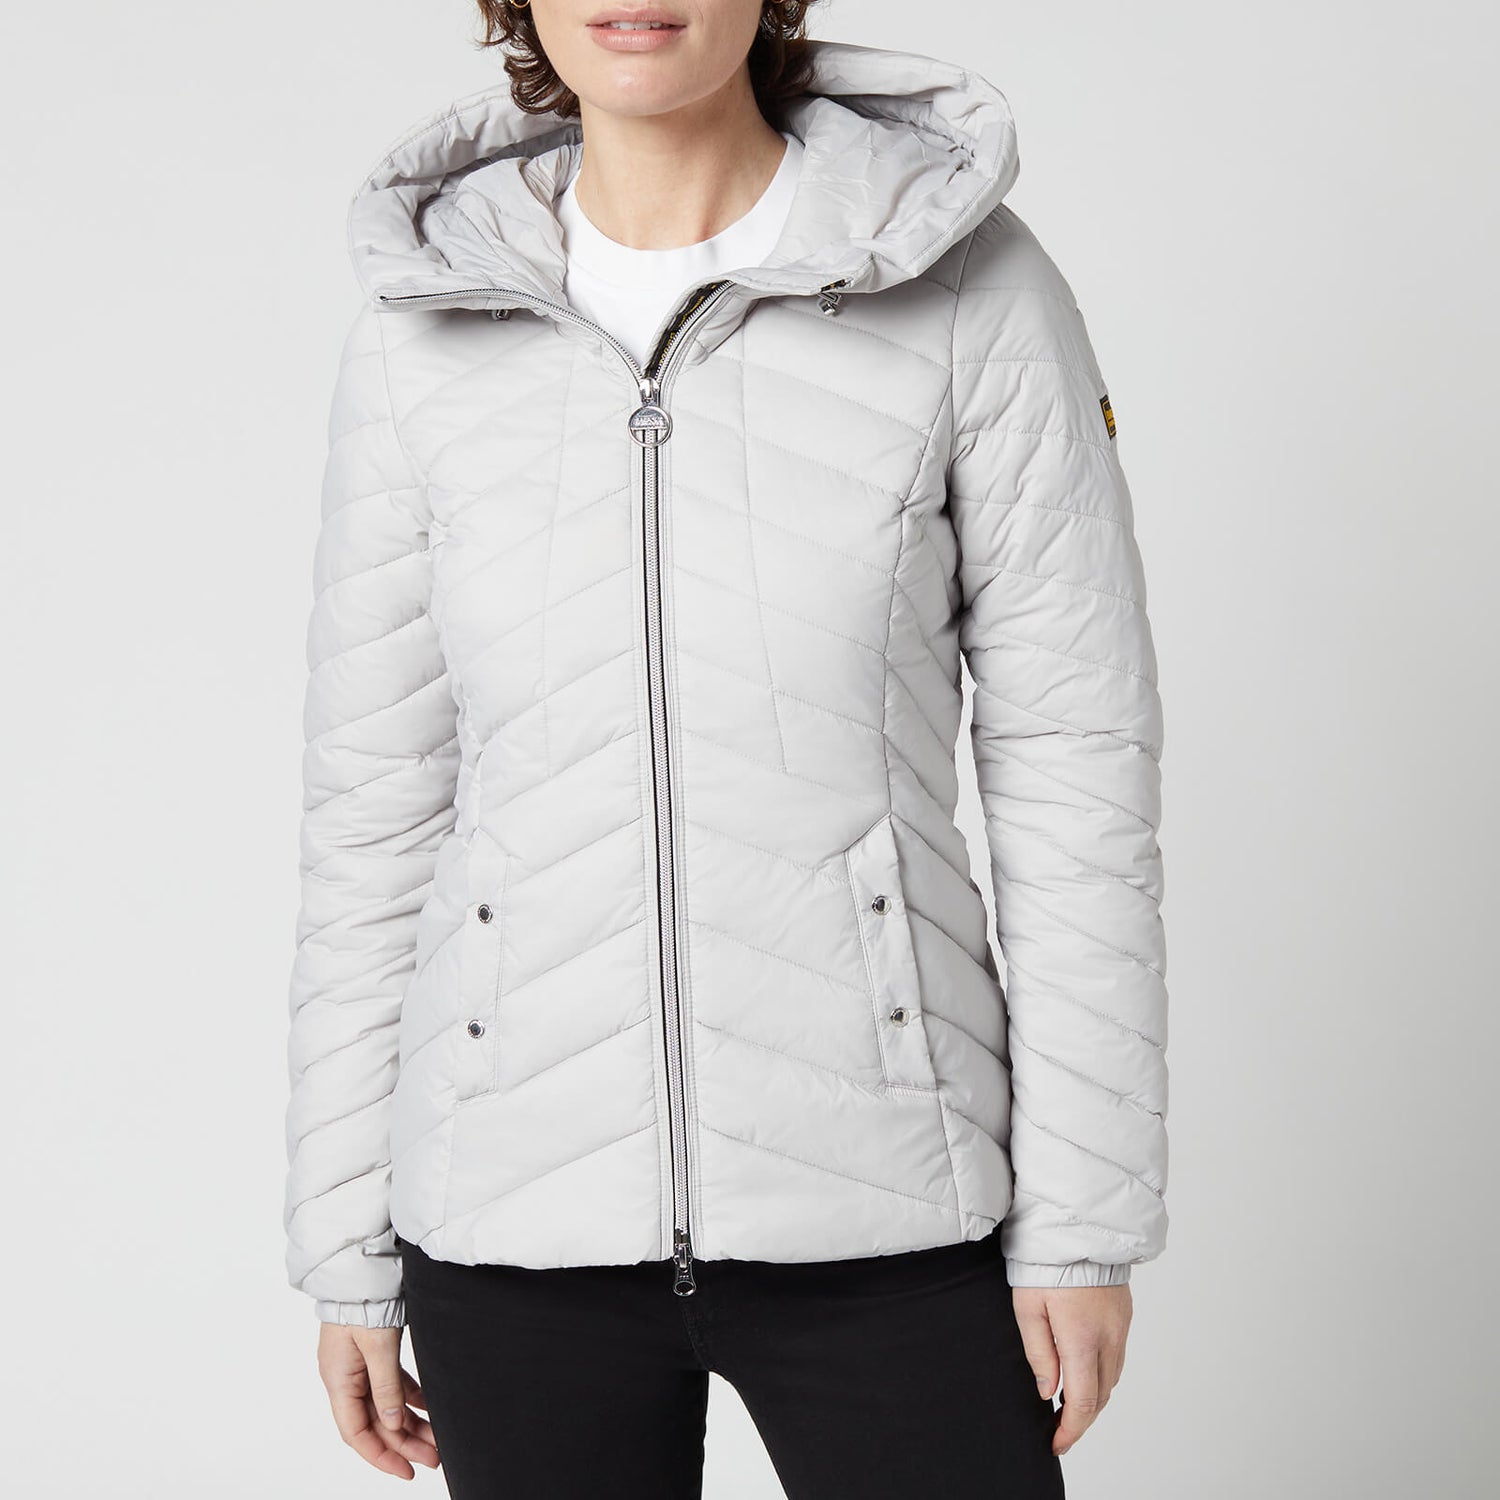 Barbour International Women's Sitka Quilted Jacket - Ice White